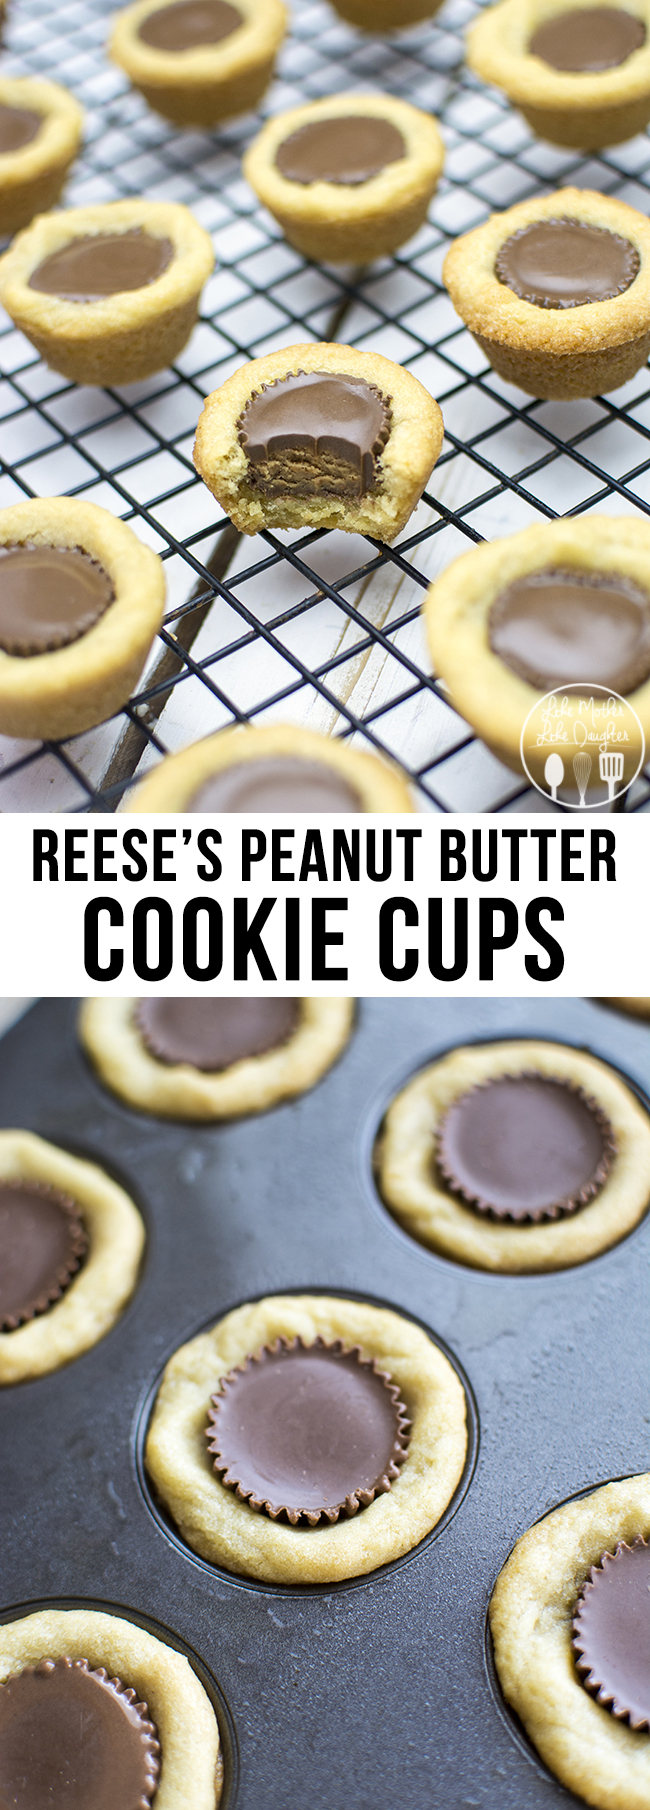 REESE's Peanut Butter Cookie Cups - These simple two ingredient cookie cups can be made in just a few minutes for the perfect snackable treat!